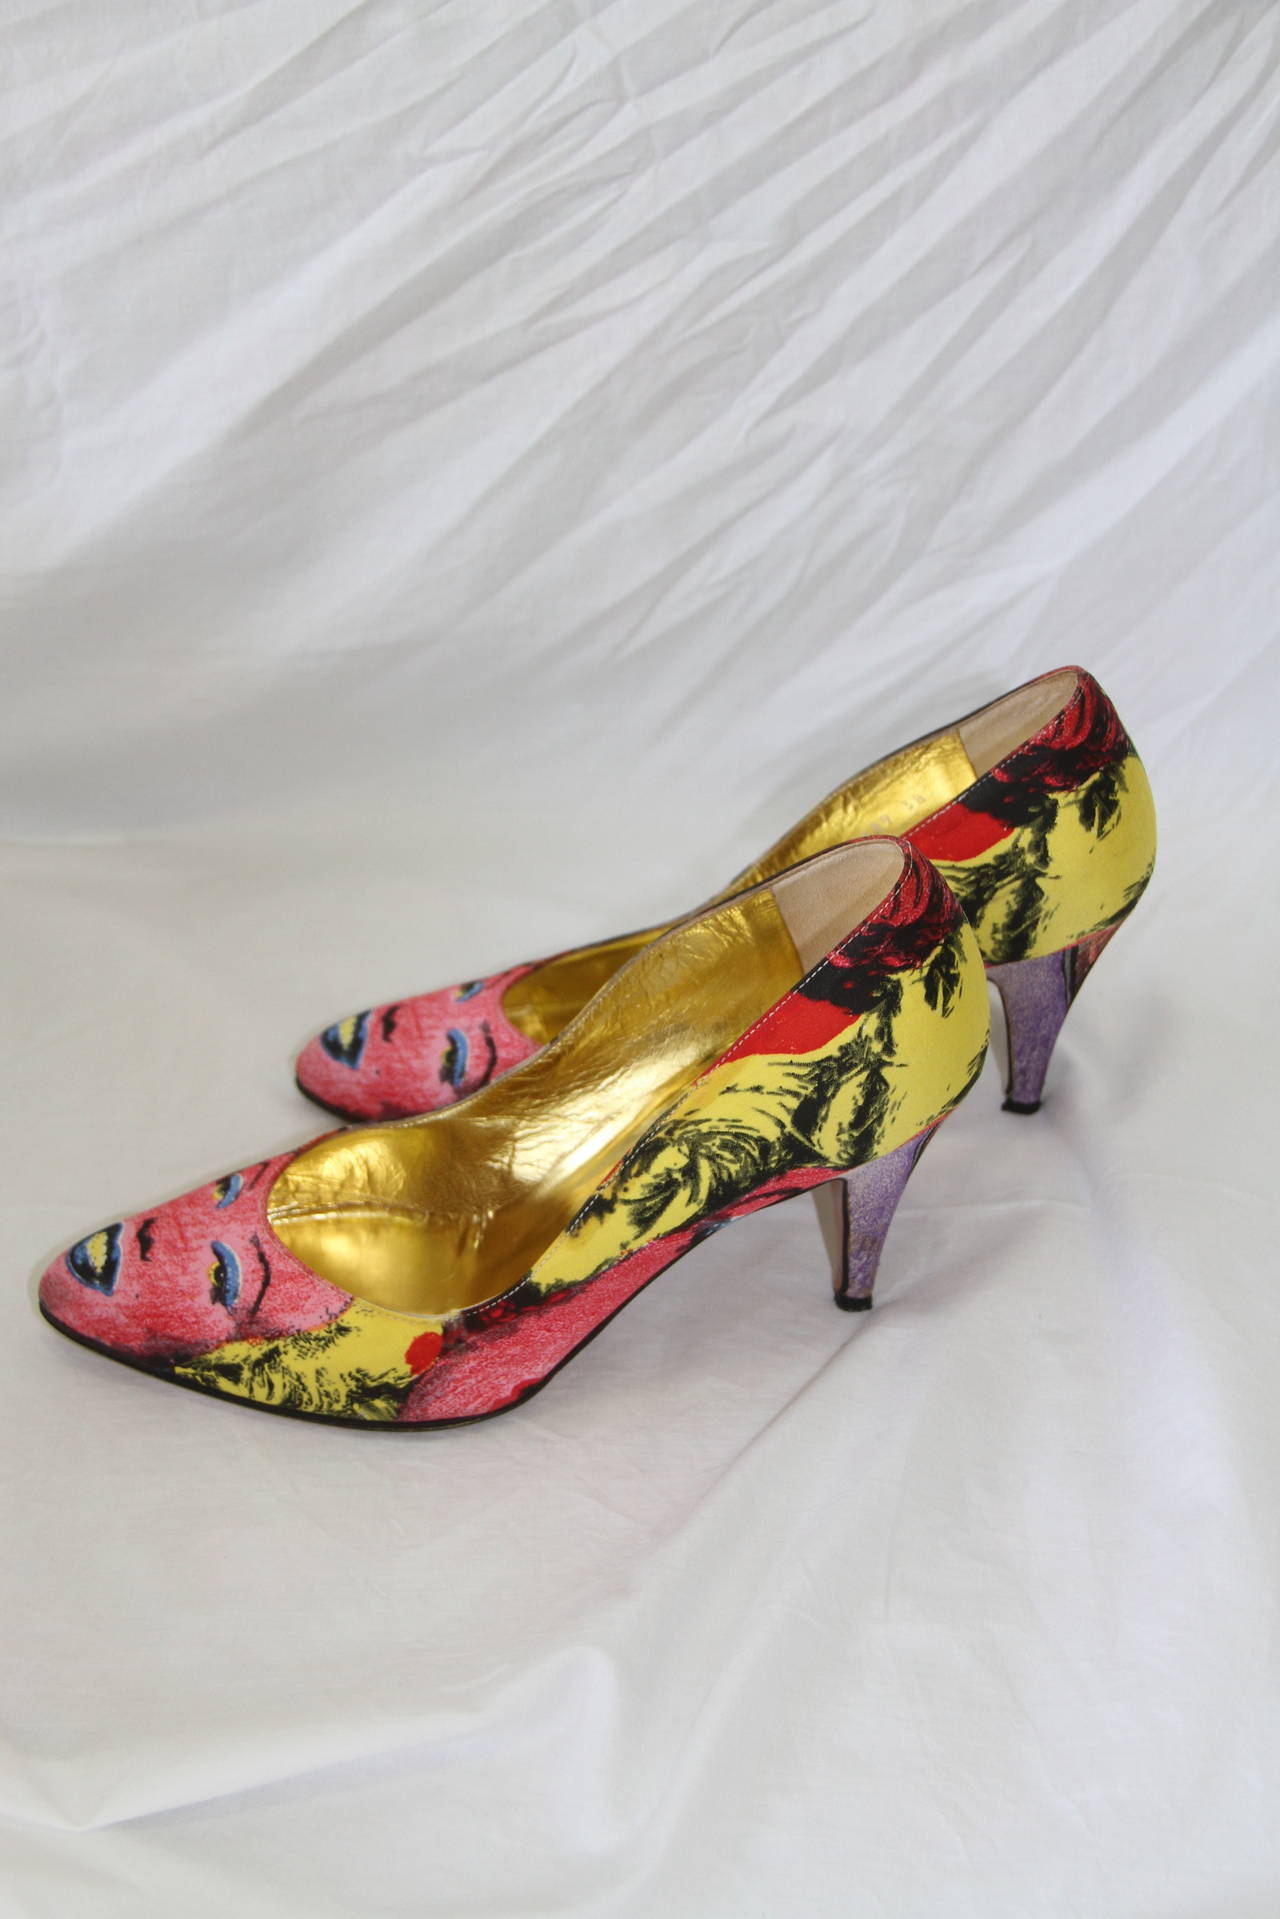 Iconic Gianni Versace silk and leather shoes, featuring polychrome images of Marilyn Monroe and James Dean, from the Spring 1991 Pop Art collection.

Marked an Italian size 38.

Manufacturer - Sergio Rossi S.p.a.